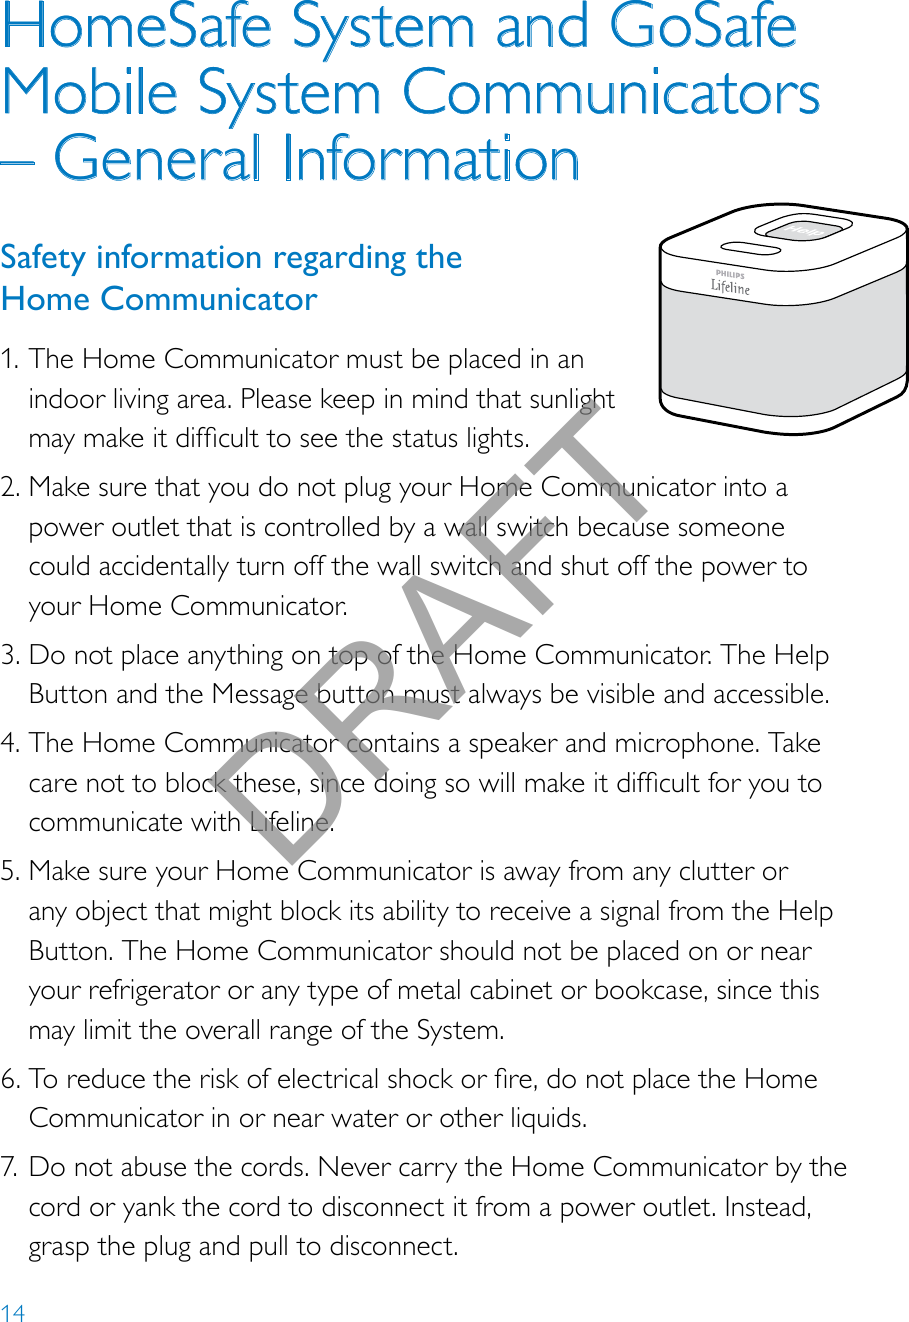 14HomeSafe System and GoSafe Mobile System Communicators – General InformationSafety information regarding the  Home Communicator1. The Home Communicator must be placed in an indoor living area. Please keep in mind that sunlight maymakeitdifculttoseethestatuslights.2. Make sure that you do not plug your Home Communicator into a power outlet that is controlled by a wall switch because someone could accidentally turn off the wall switch and shut off the power to your Home Communicator. 3. Do not place anything on top of the Home Communicator. The Help Button and the Message button must always be visible and accessible.4. The Home Communicator contains a speaker and microphone. Take carenottoblockthese,sincedoingsowillmakeitdifcultforyoutocommunicate with Lifeline. 5. Make sure your Home Communicator is away from any clutter or any object that might block its ability to receive a signal from the Help Button. The Home Communicator should not be placed on or near your refrigerator or any type of metal cabinet or bookcase, since this may limit the overall range of the System.6. Toreducetheriskofelectricalshockorre,donotplacetheHomeCommunicator in or near water or other liquids.7. Do not abuse the cords. Never carry the Home Communicator by the cord or yank the cord to disconnect it from a power outlet. Instead, grasp the plug and pull to disconnect.Help call in progress. Please wait.Hello, Mrs. Smith.Welcome toPhilips Lifeline.DRAFT